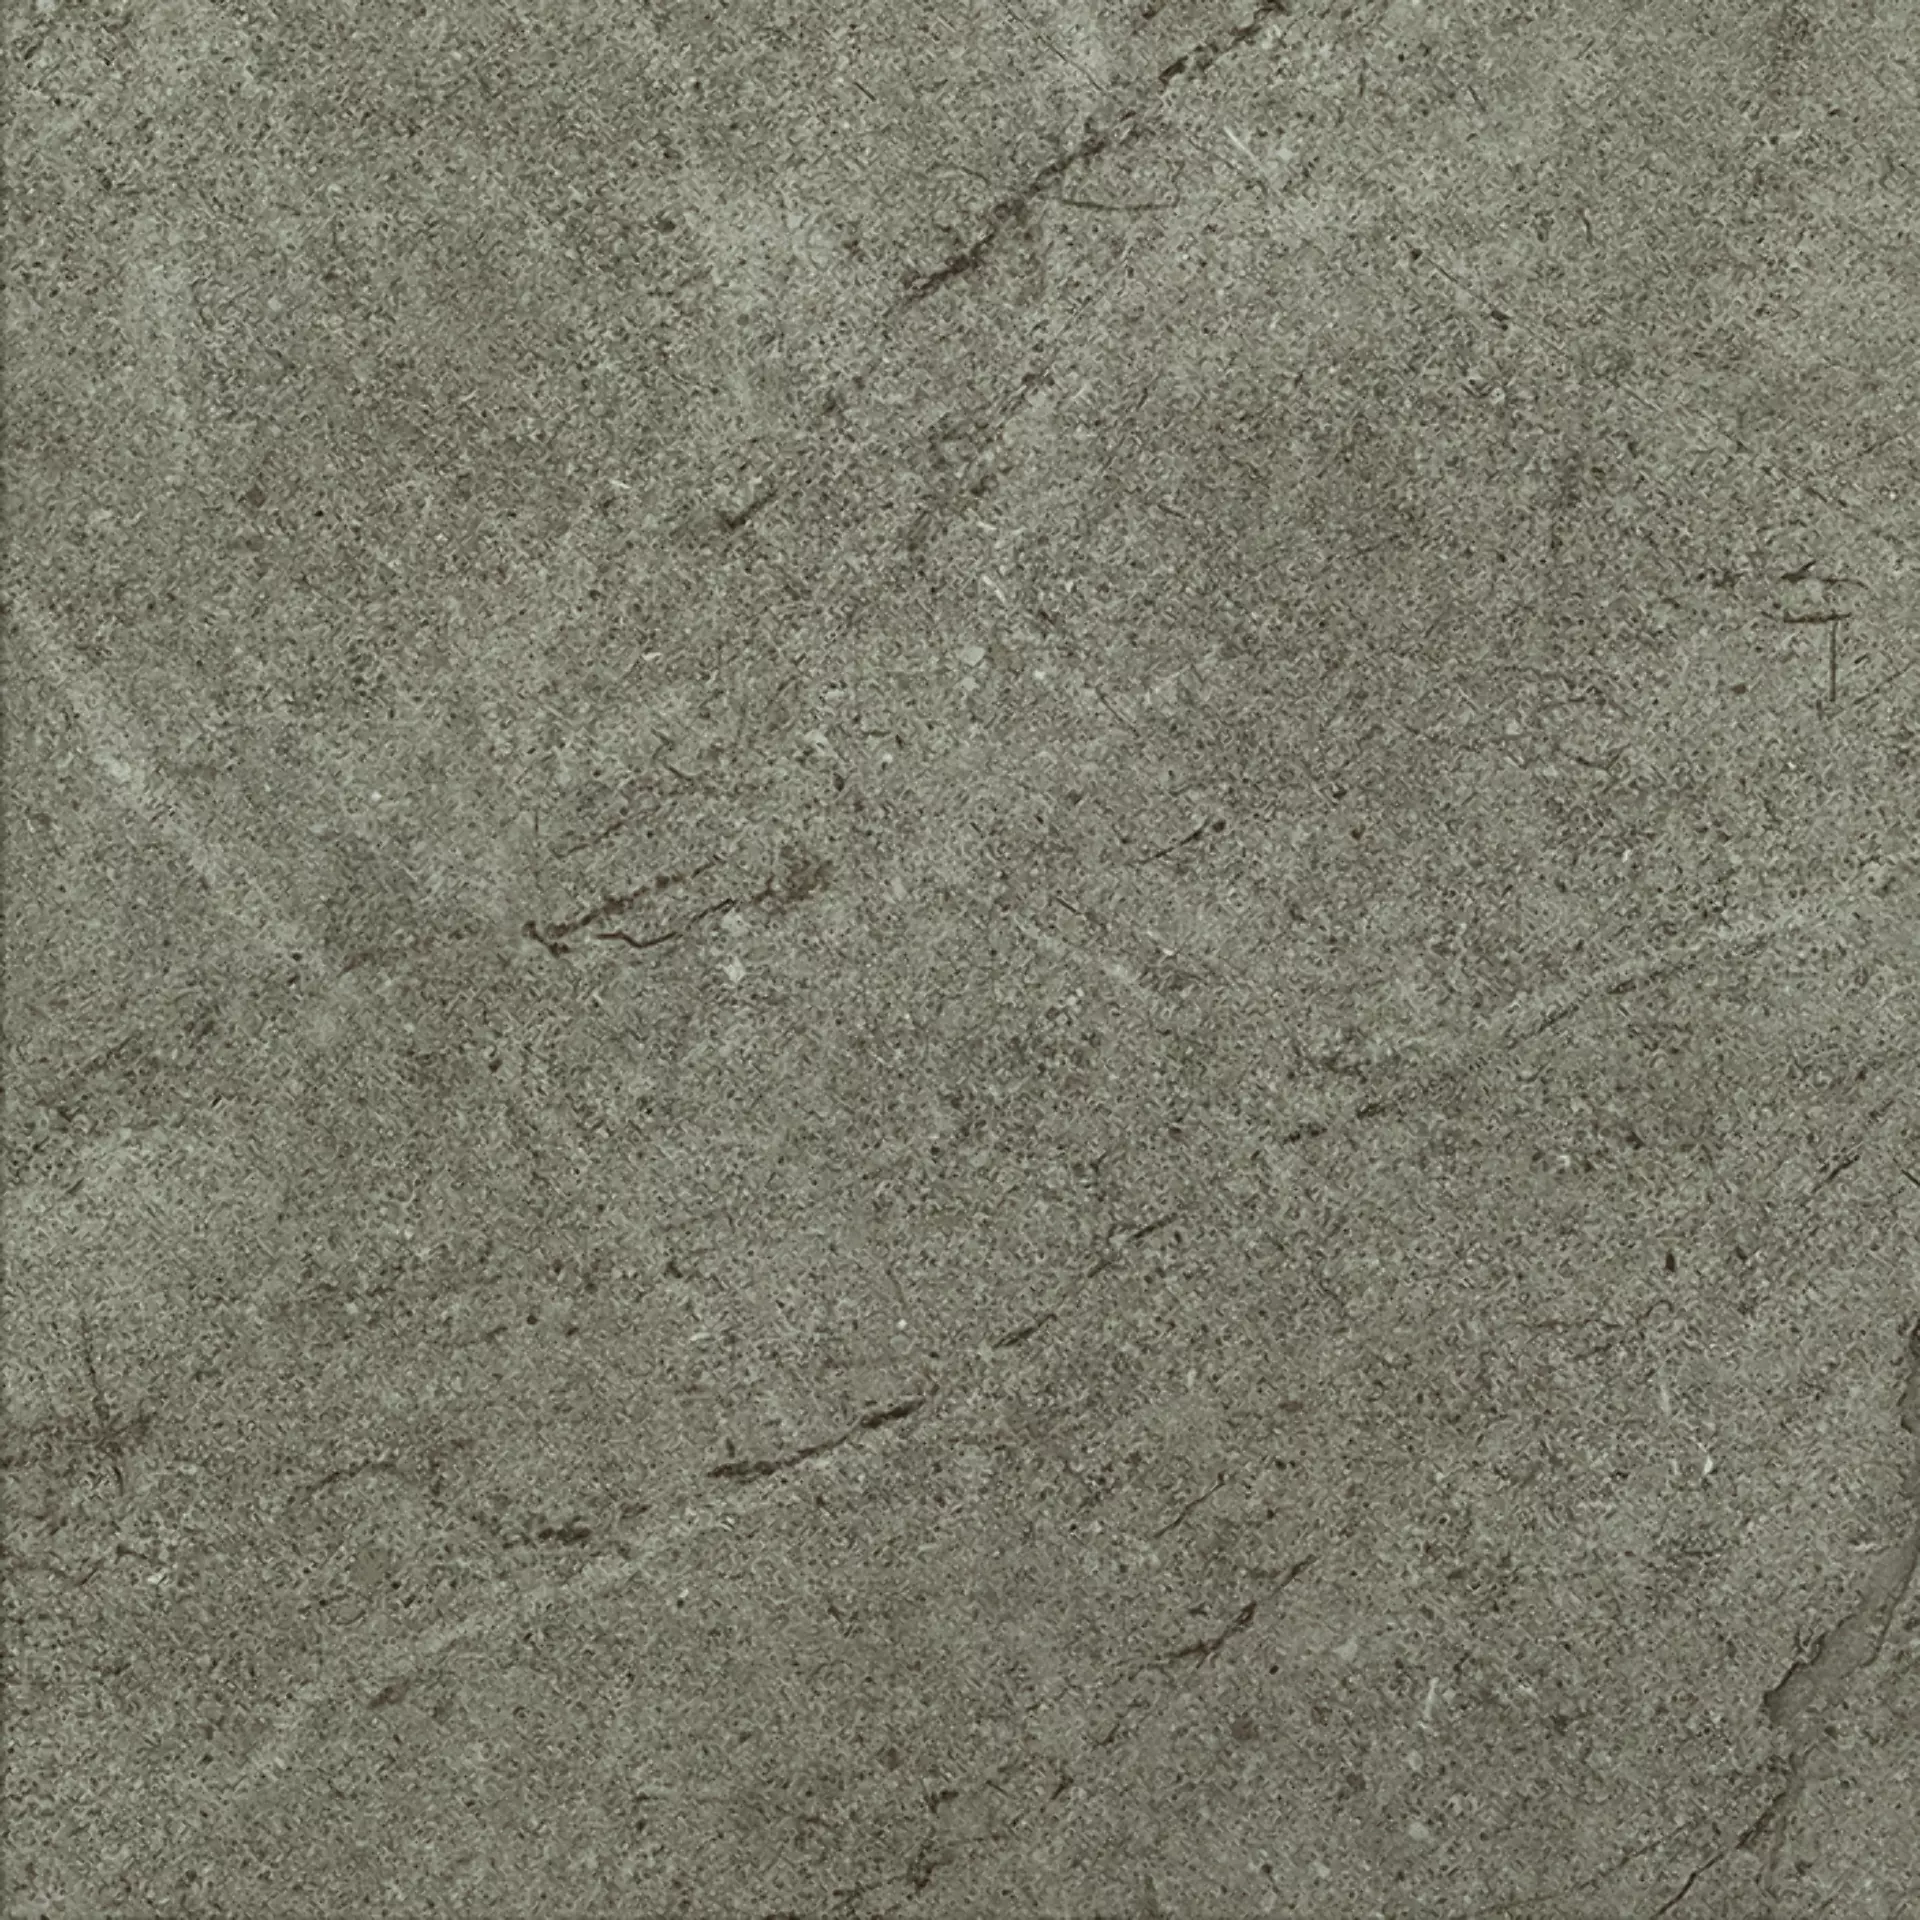 Cercom Archistone Taupe Naturale 1081749 100x100cm rectified 8,5mm